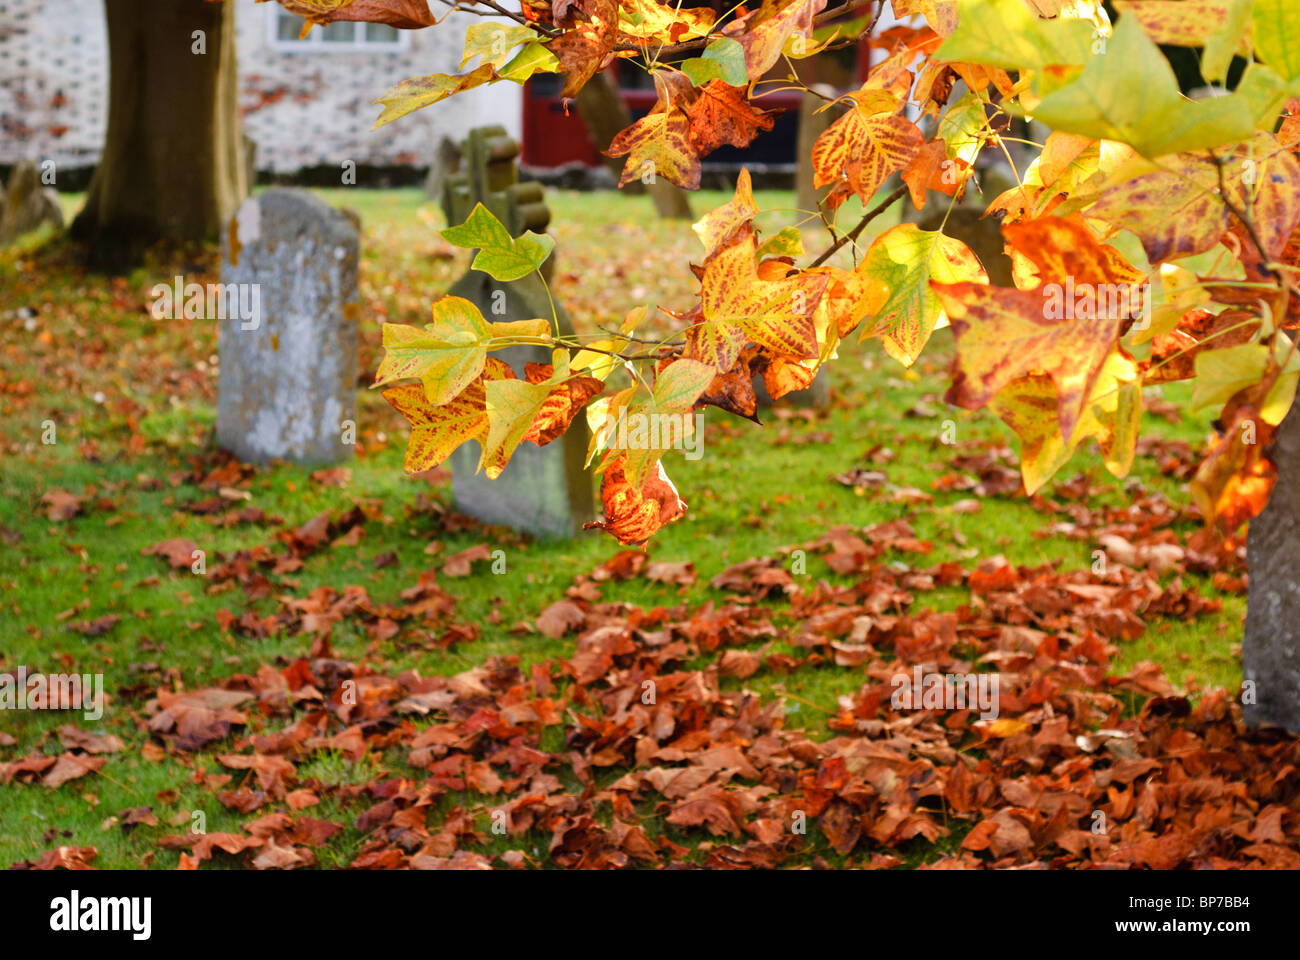 Golden Autumn leaves in the Churchyard of St Peter and St Paul Church in Wantage ,Oxfordshire, England, U.K. Stock Photo